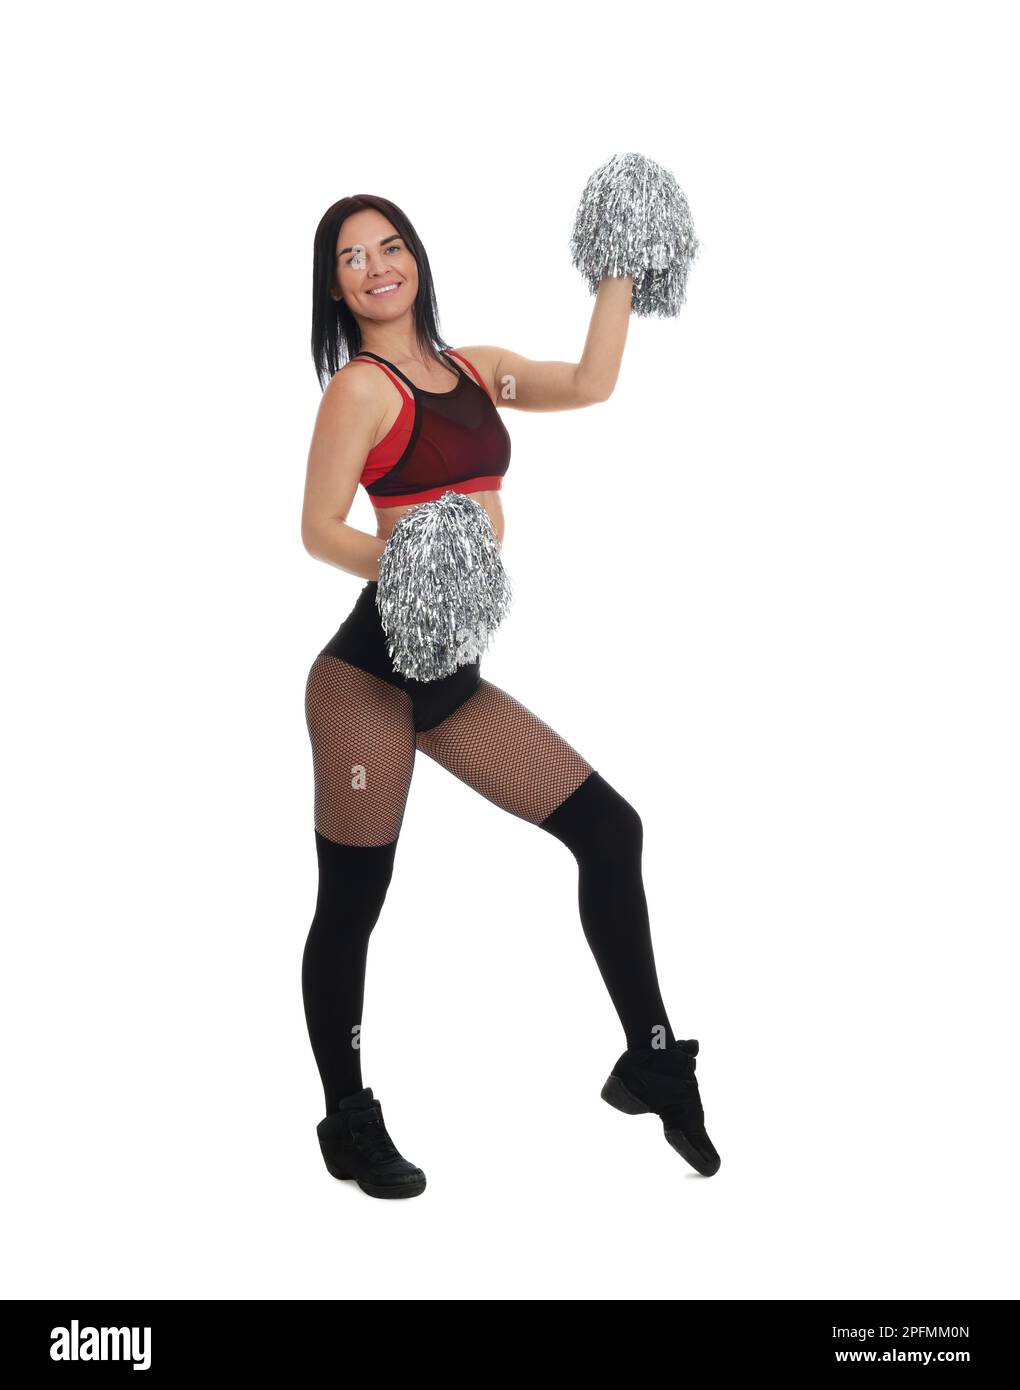 Cheerleading pom poms Cut Out Stock Images & Pictures - Alamy